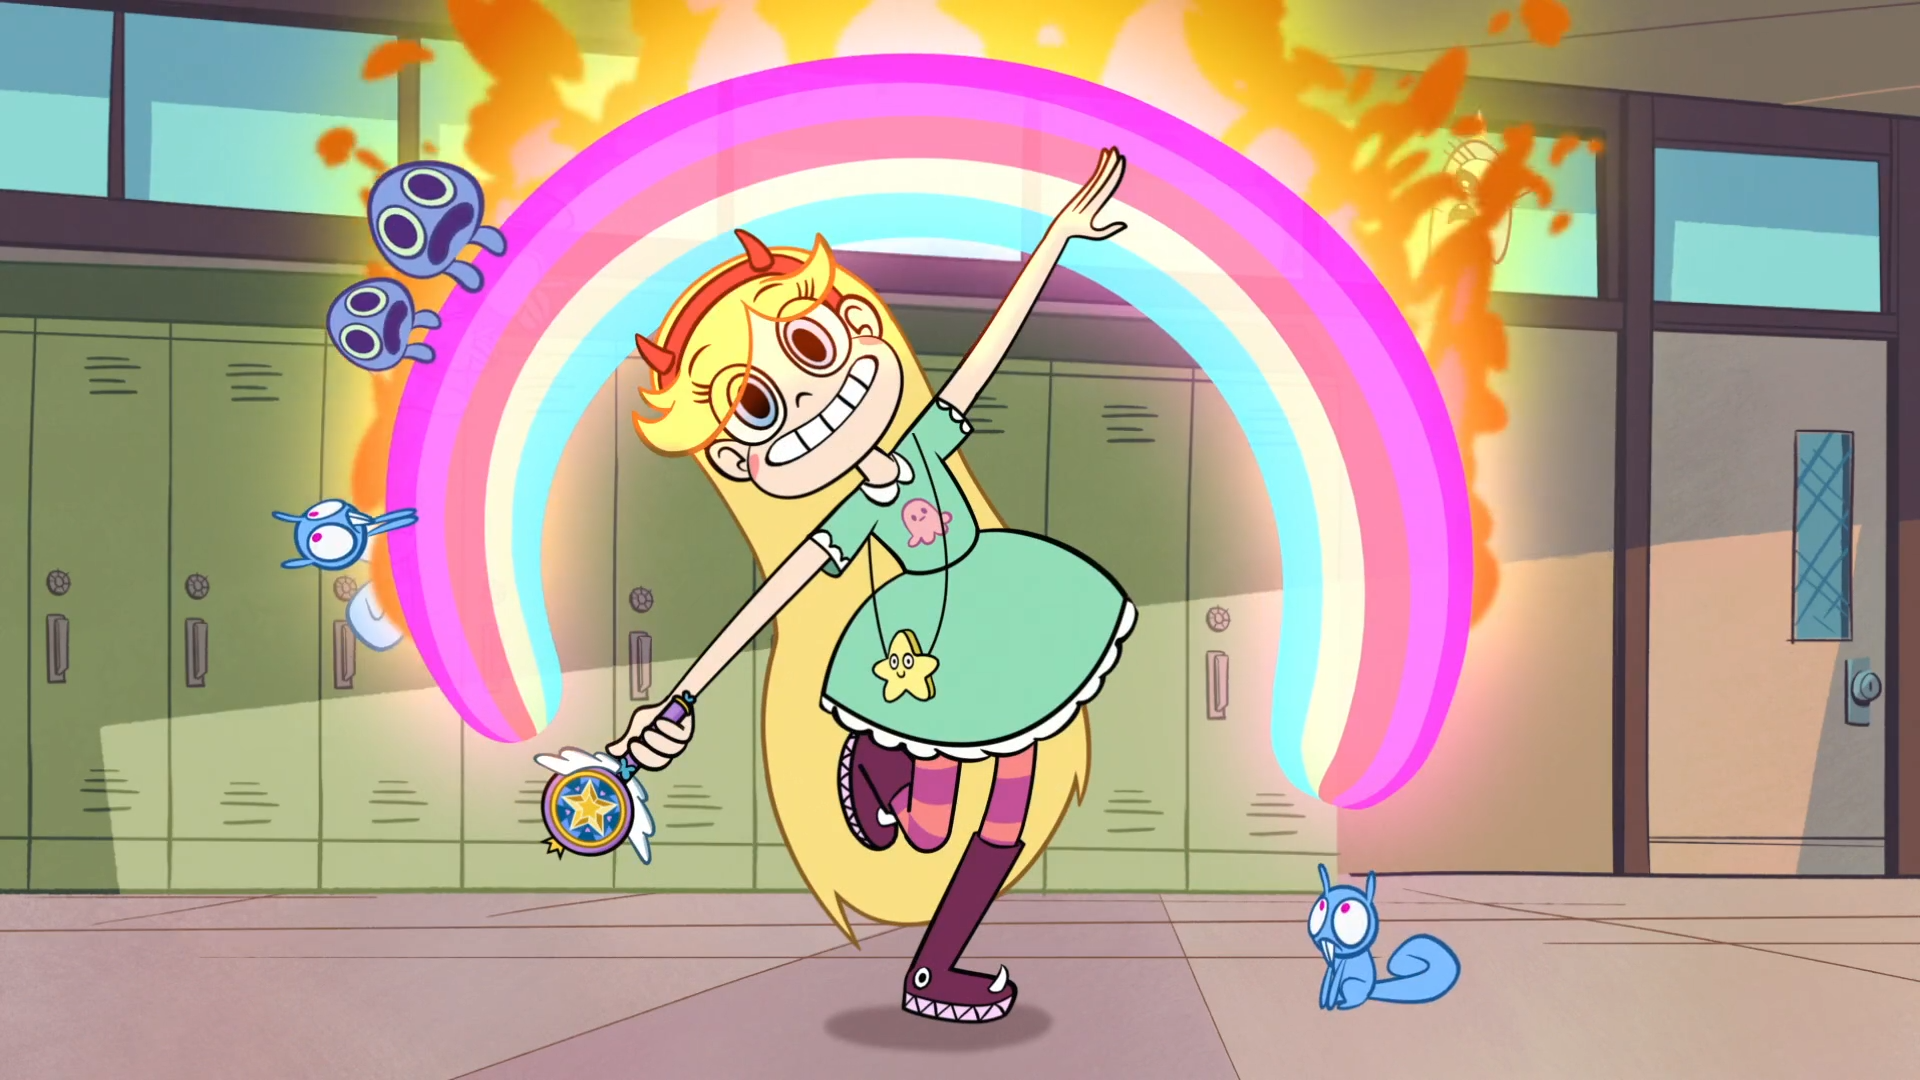 Series Star Vs The Forces Of Evil Skirt Star Butterfly Blue Eyes Animation Rainbows Fire Chipmunk 1920x1080